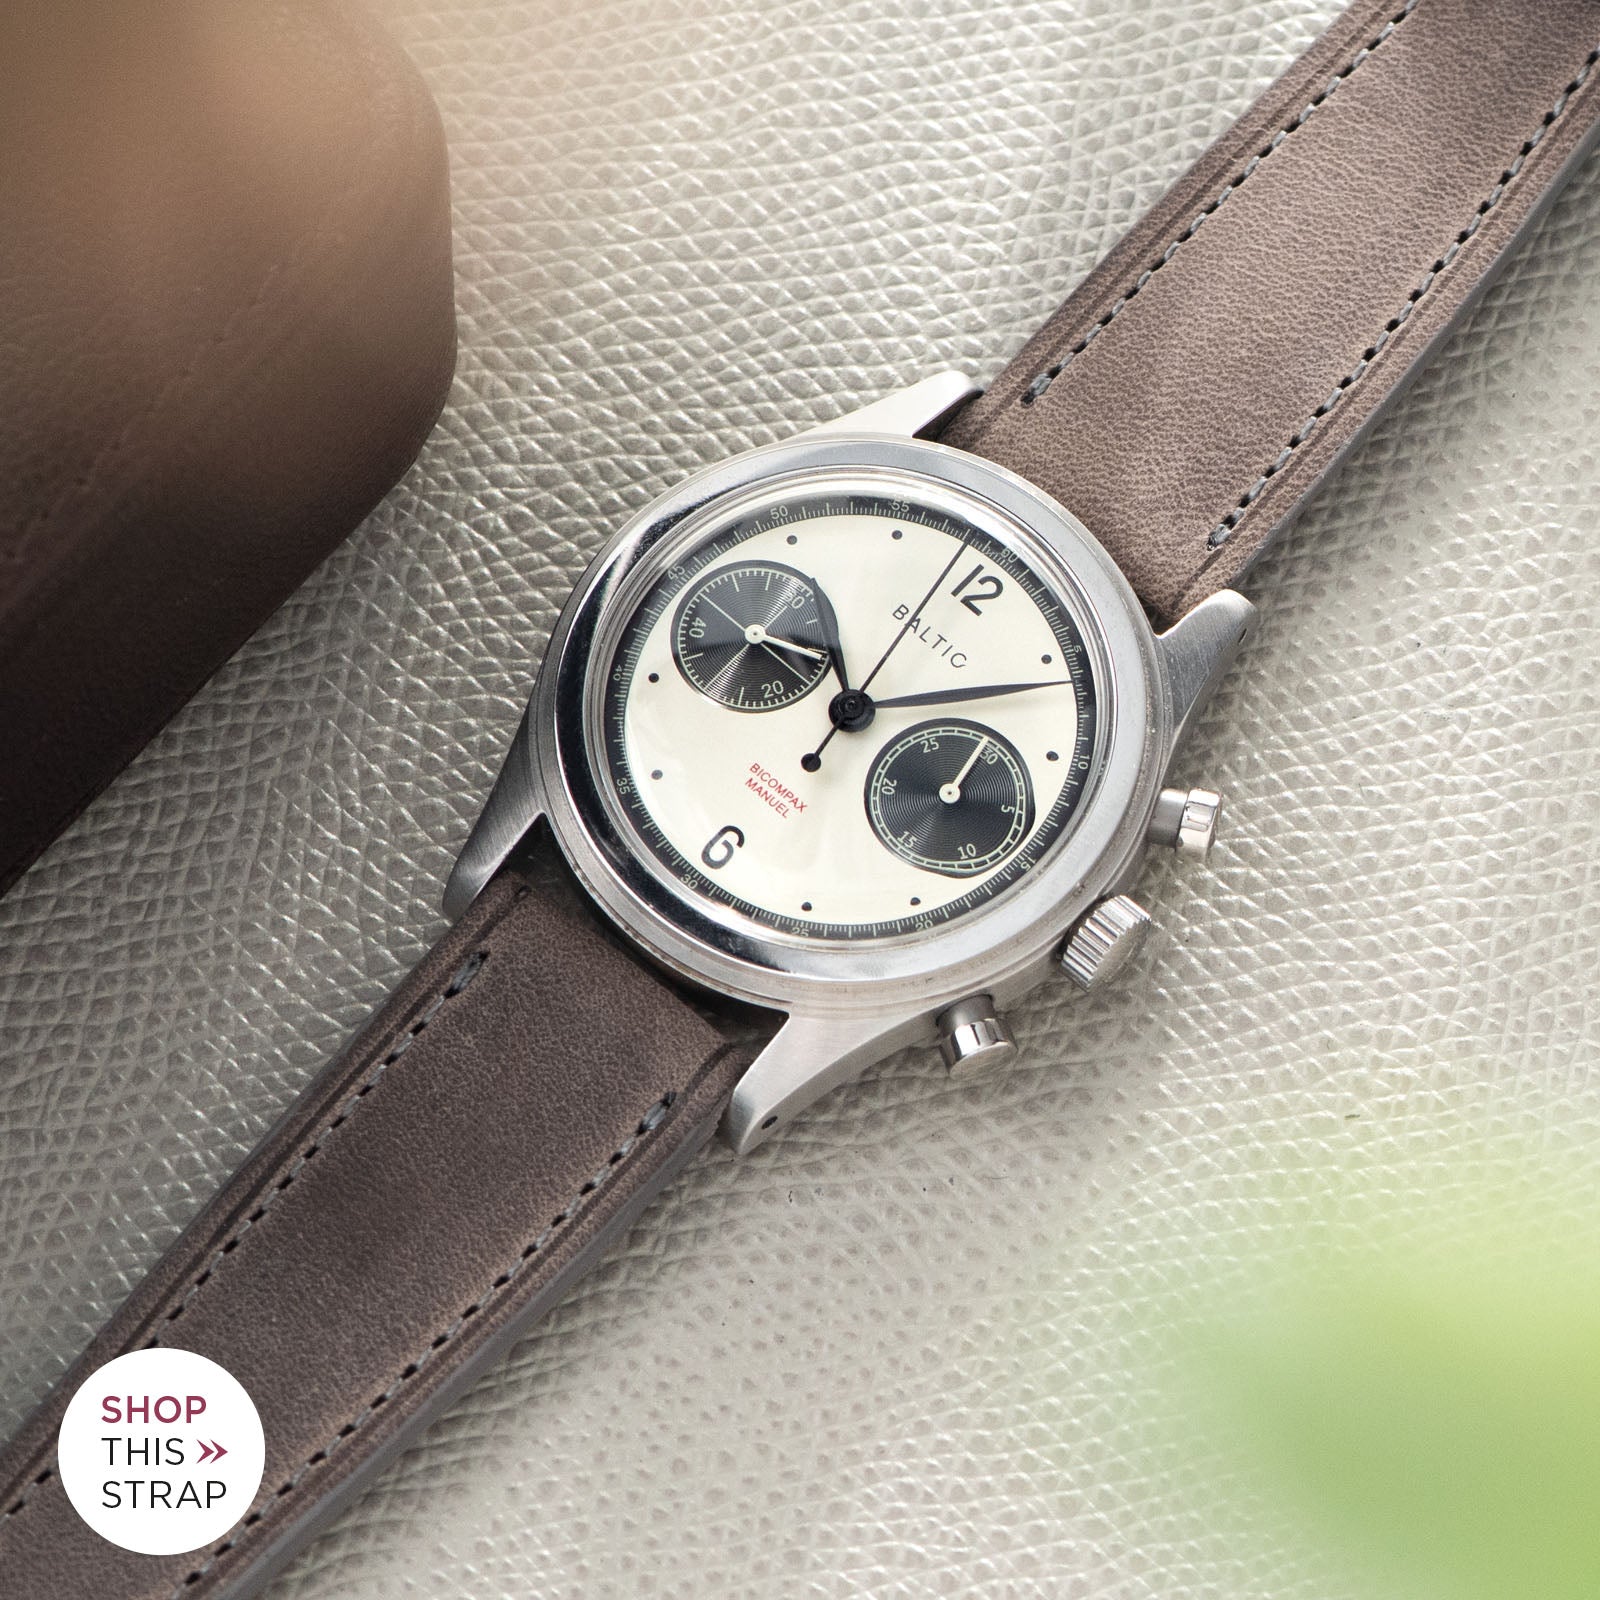 Bulang and Sons_Strap Guide_The Baltic-Chronograph-Panda-Limited-Edition_Café Au Lait Leather Watch Strap